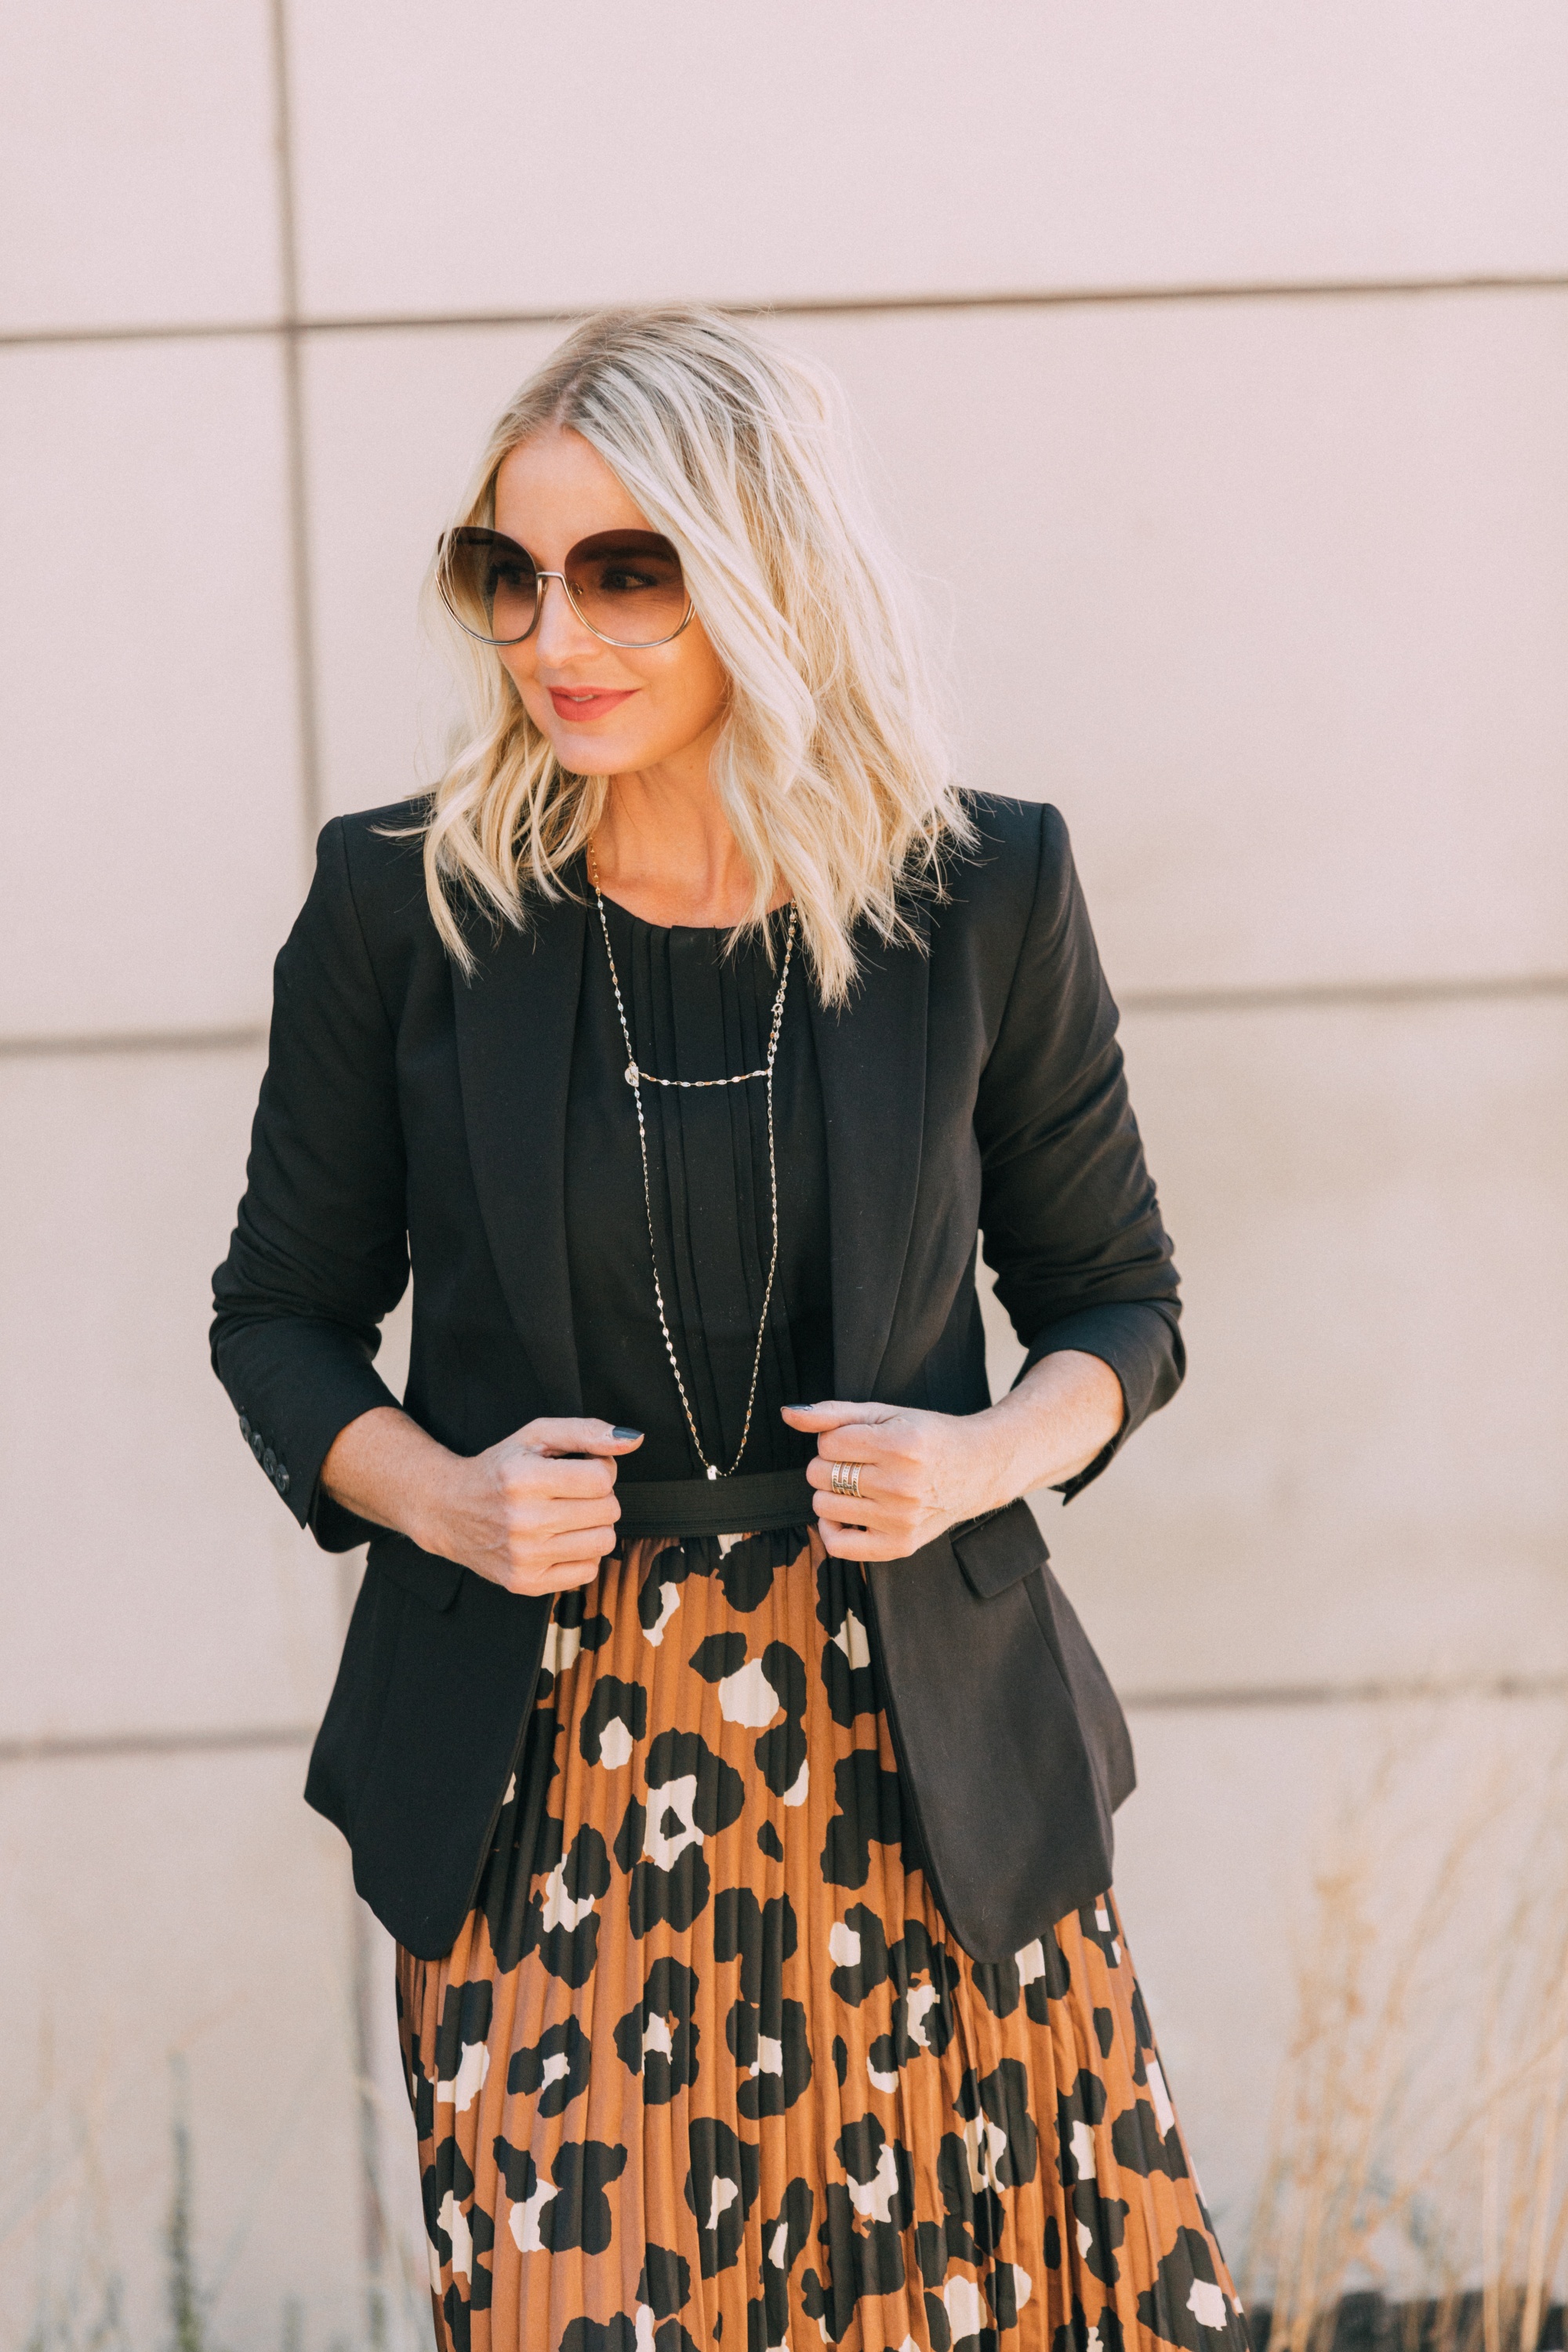 Affordable Blazers fashion blogger outfit with pleated leopard print midi skirt workwear